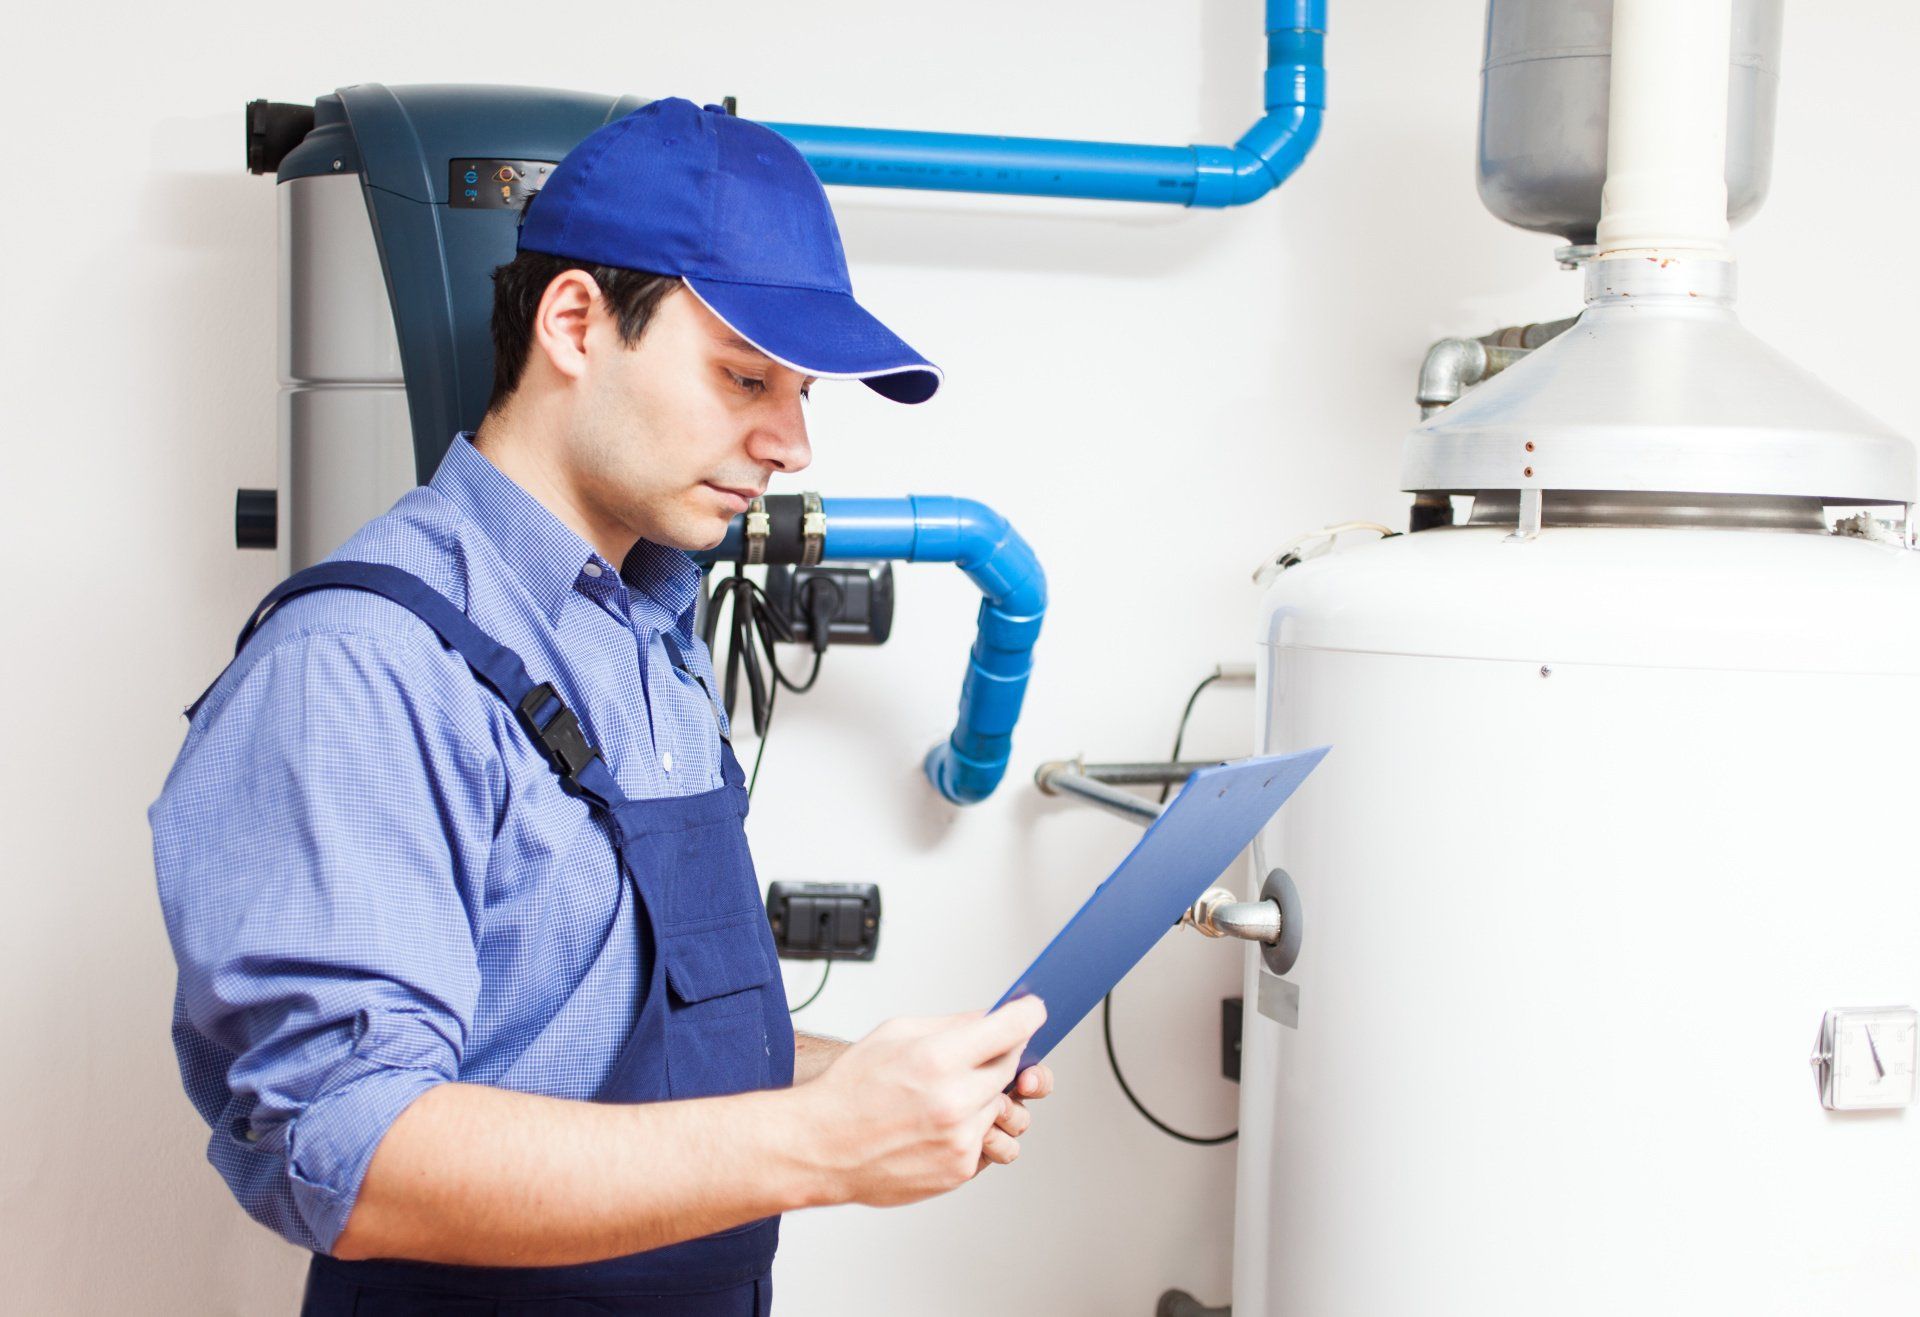 Residential Heating Service: What to Look For in an HVAC Company